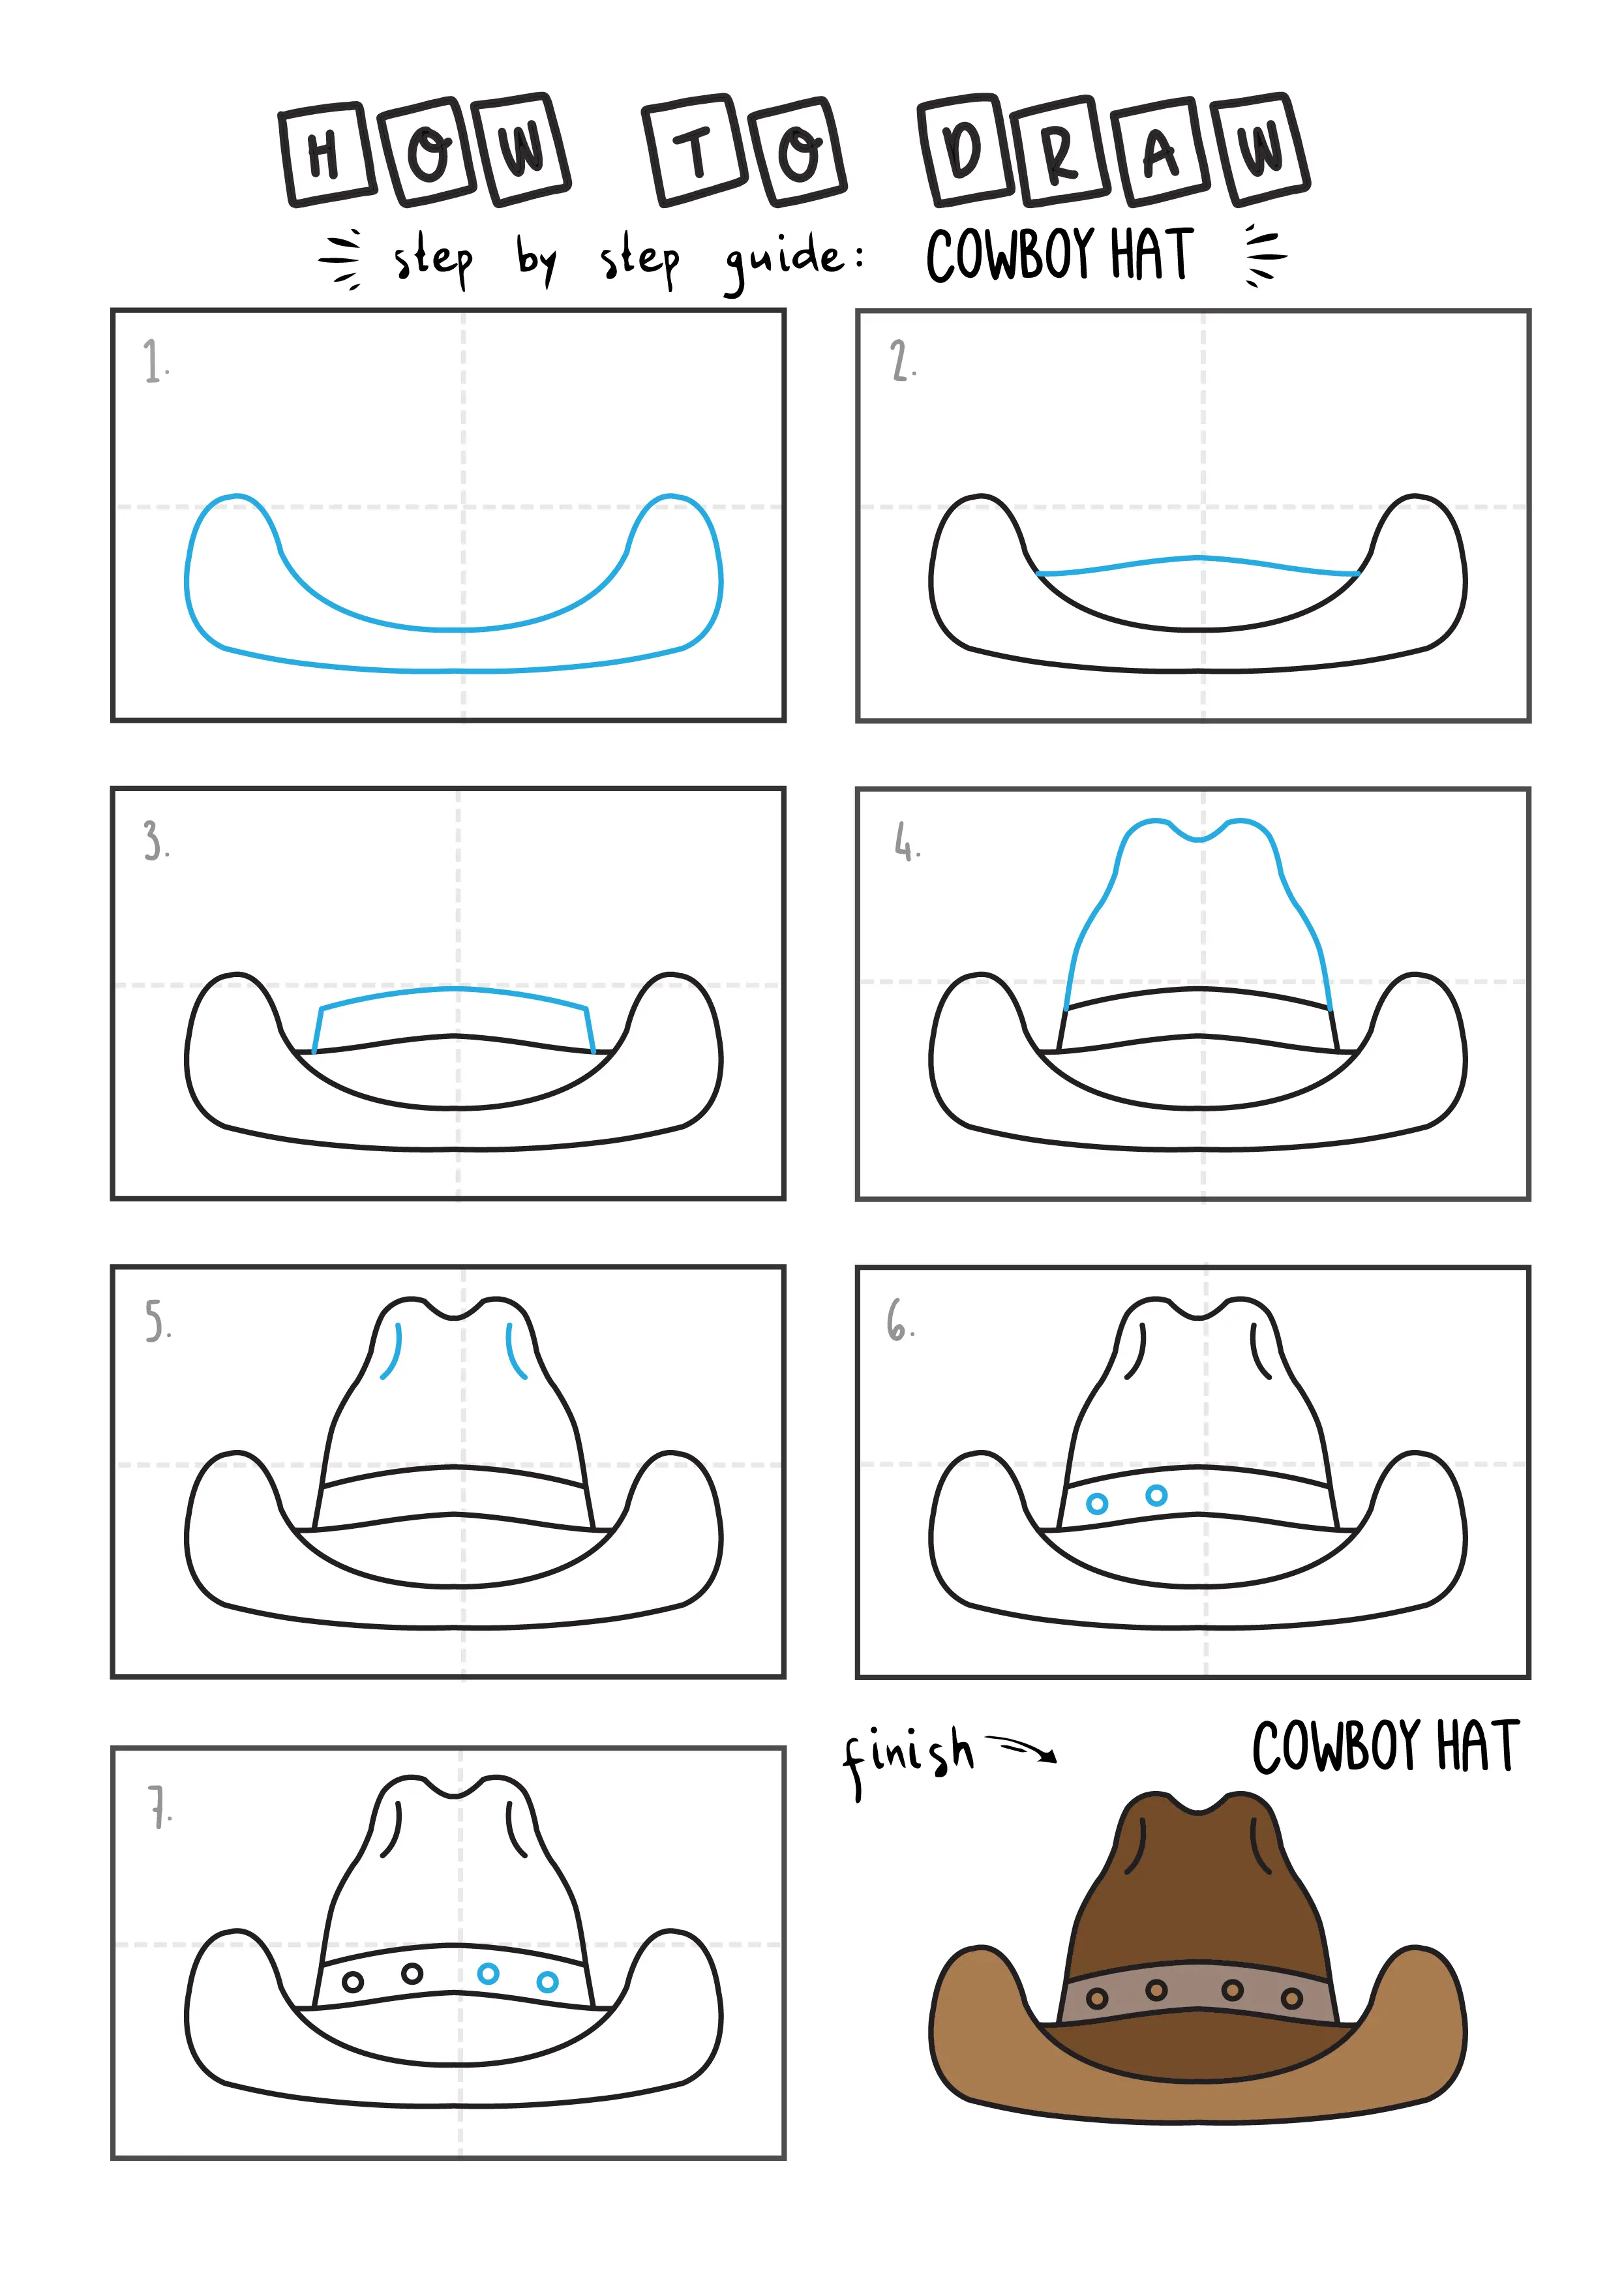 How To Draw COWBOY HAT Step By Step For Kids Easy Illustration Doodle Drawing GUIDE